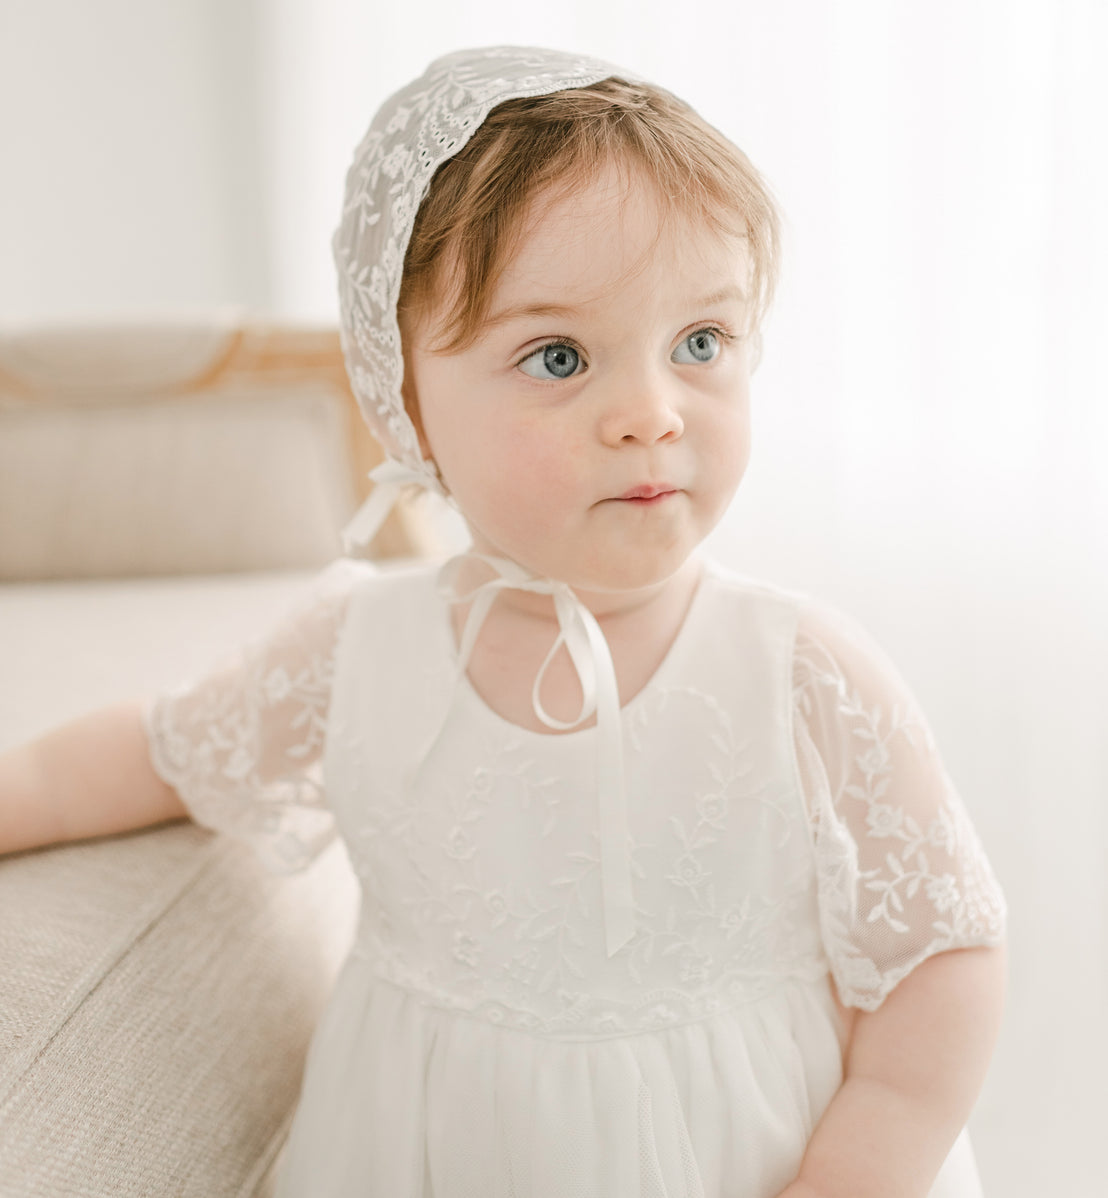 baby wearing ella lace bonnet and full-length christening gown